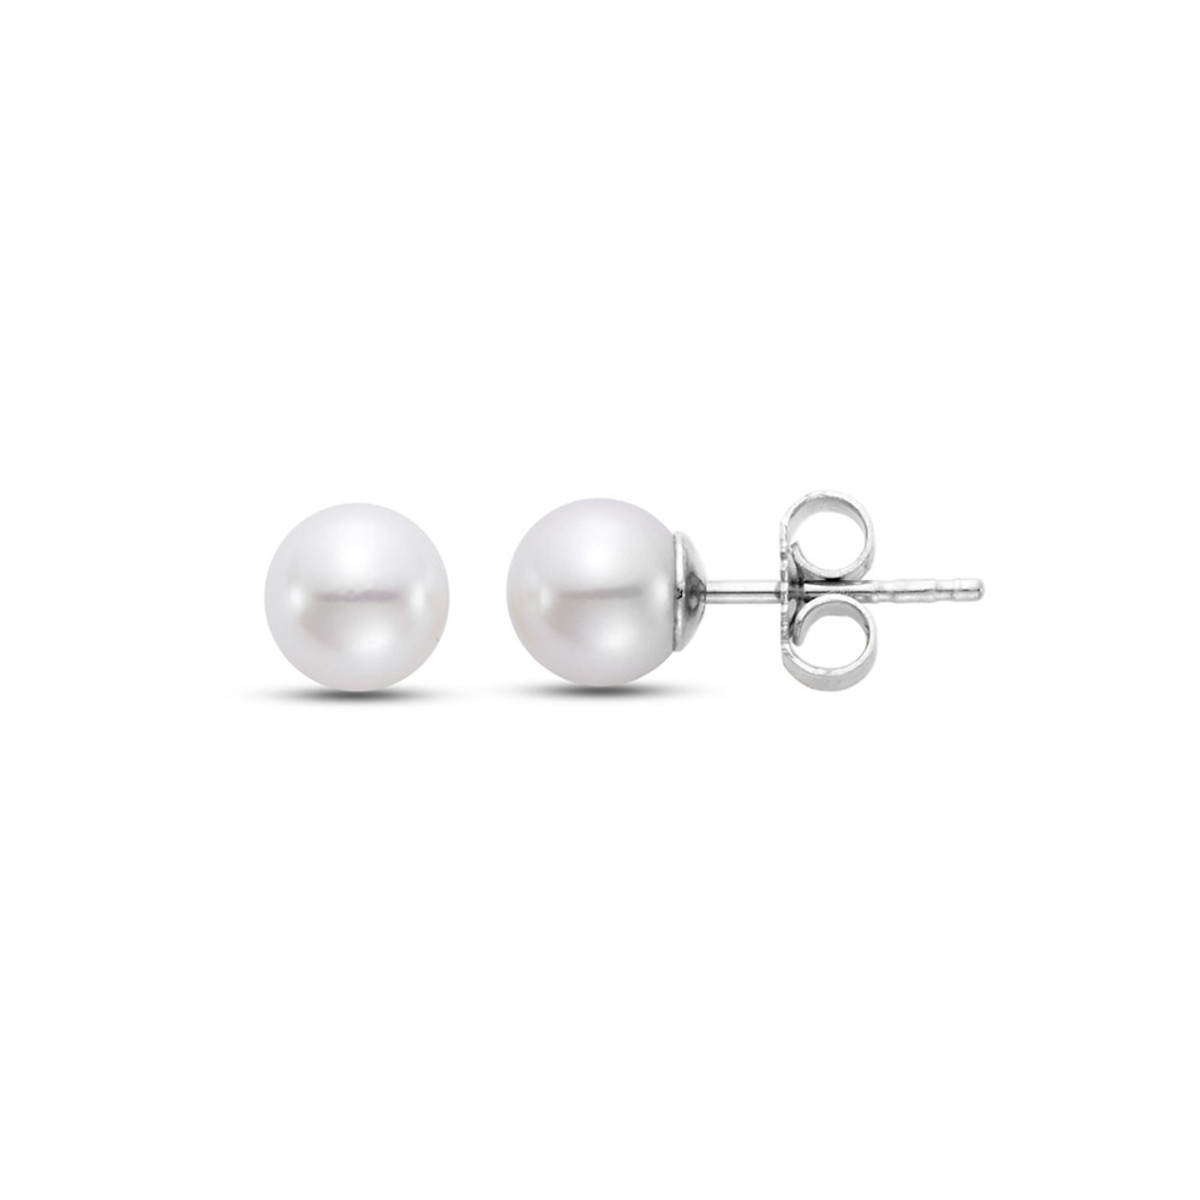 Hyde Park 18K White Gold Pearl Studs. 5.5-6MM. AA Grade Akoya Pearl.-25712 Product Image